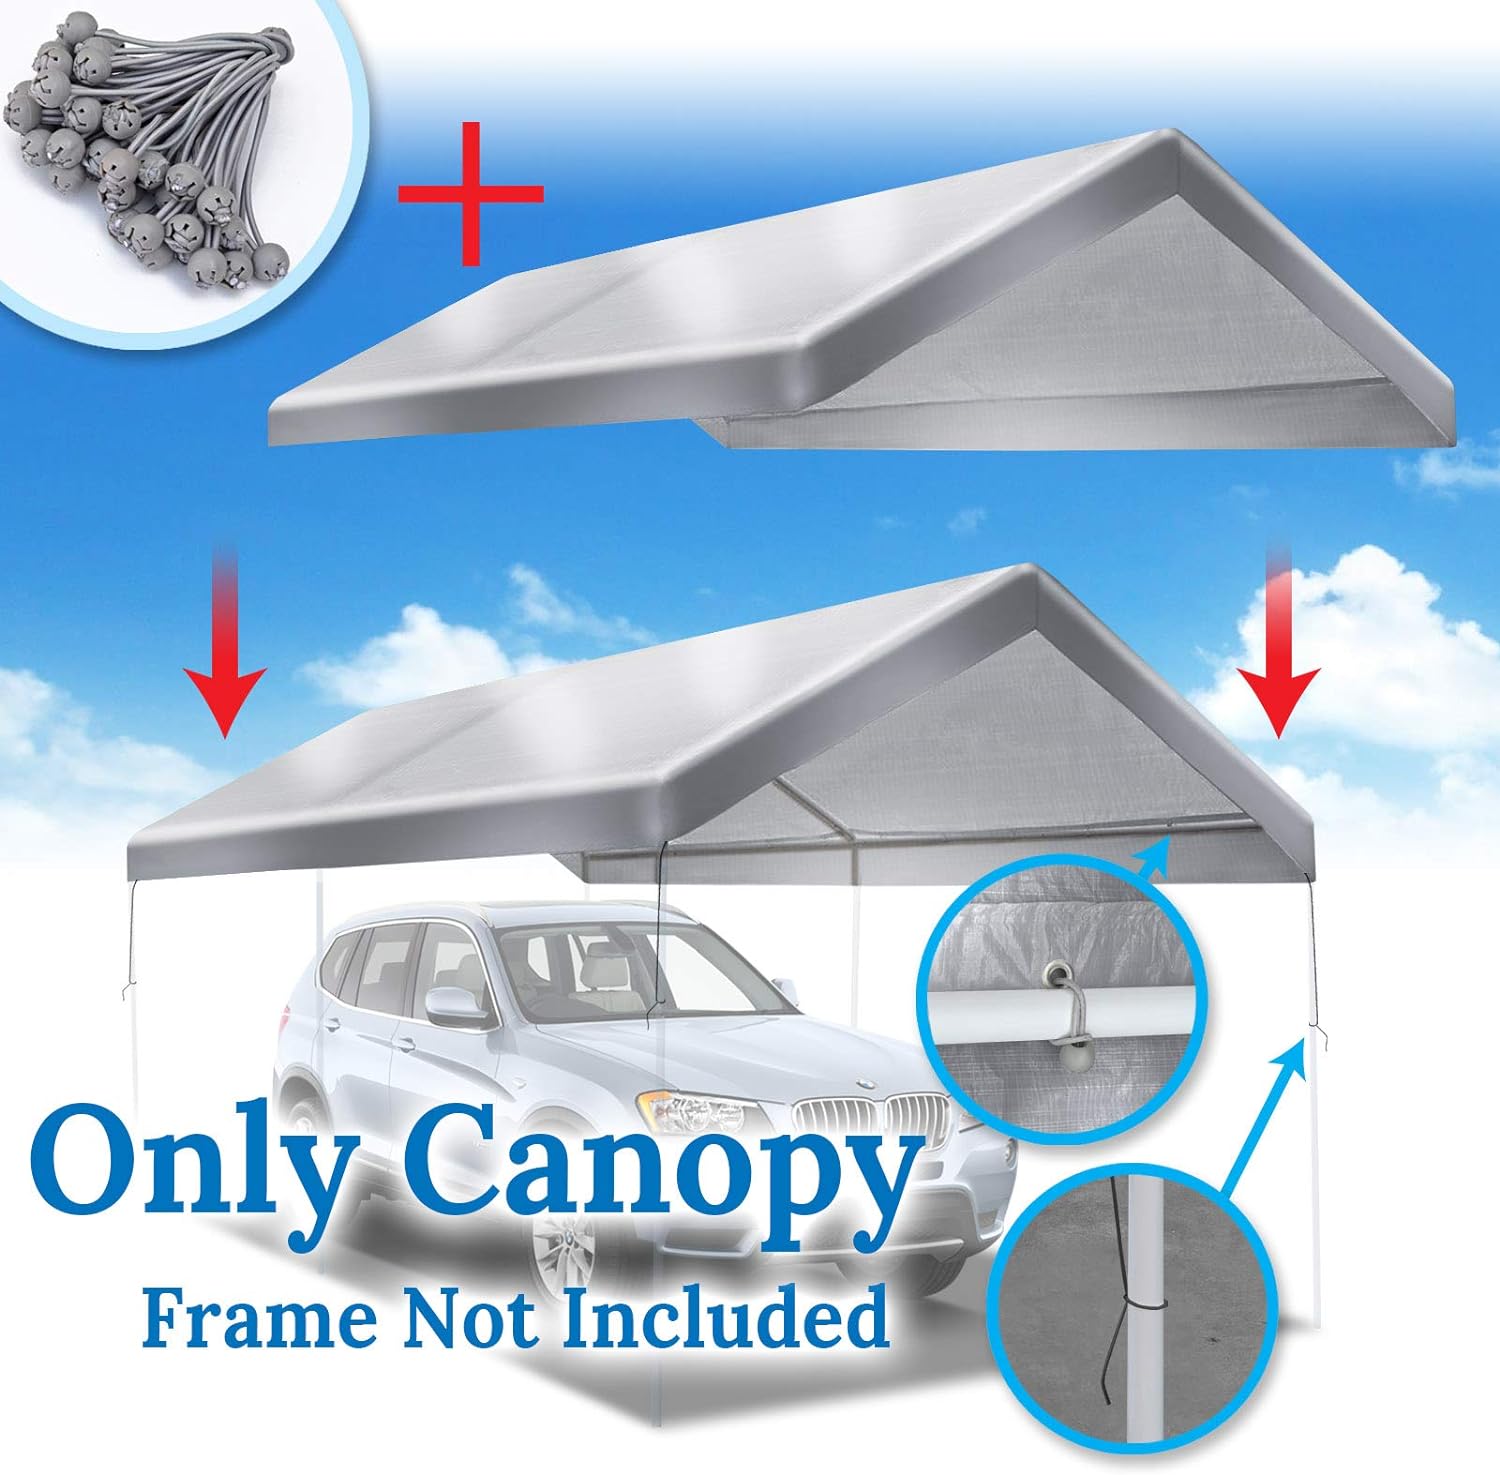 Benefit-USA BenefitUSA Canopy ONLY 10'x20' Carport Replacement Canopy Outdoor Tent Garage Top Tarp Shelter Cover w Ball Bungees (Silver)